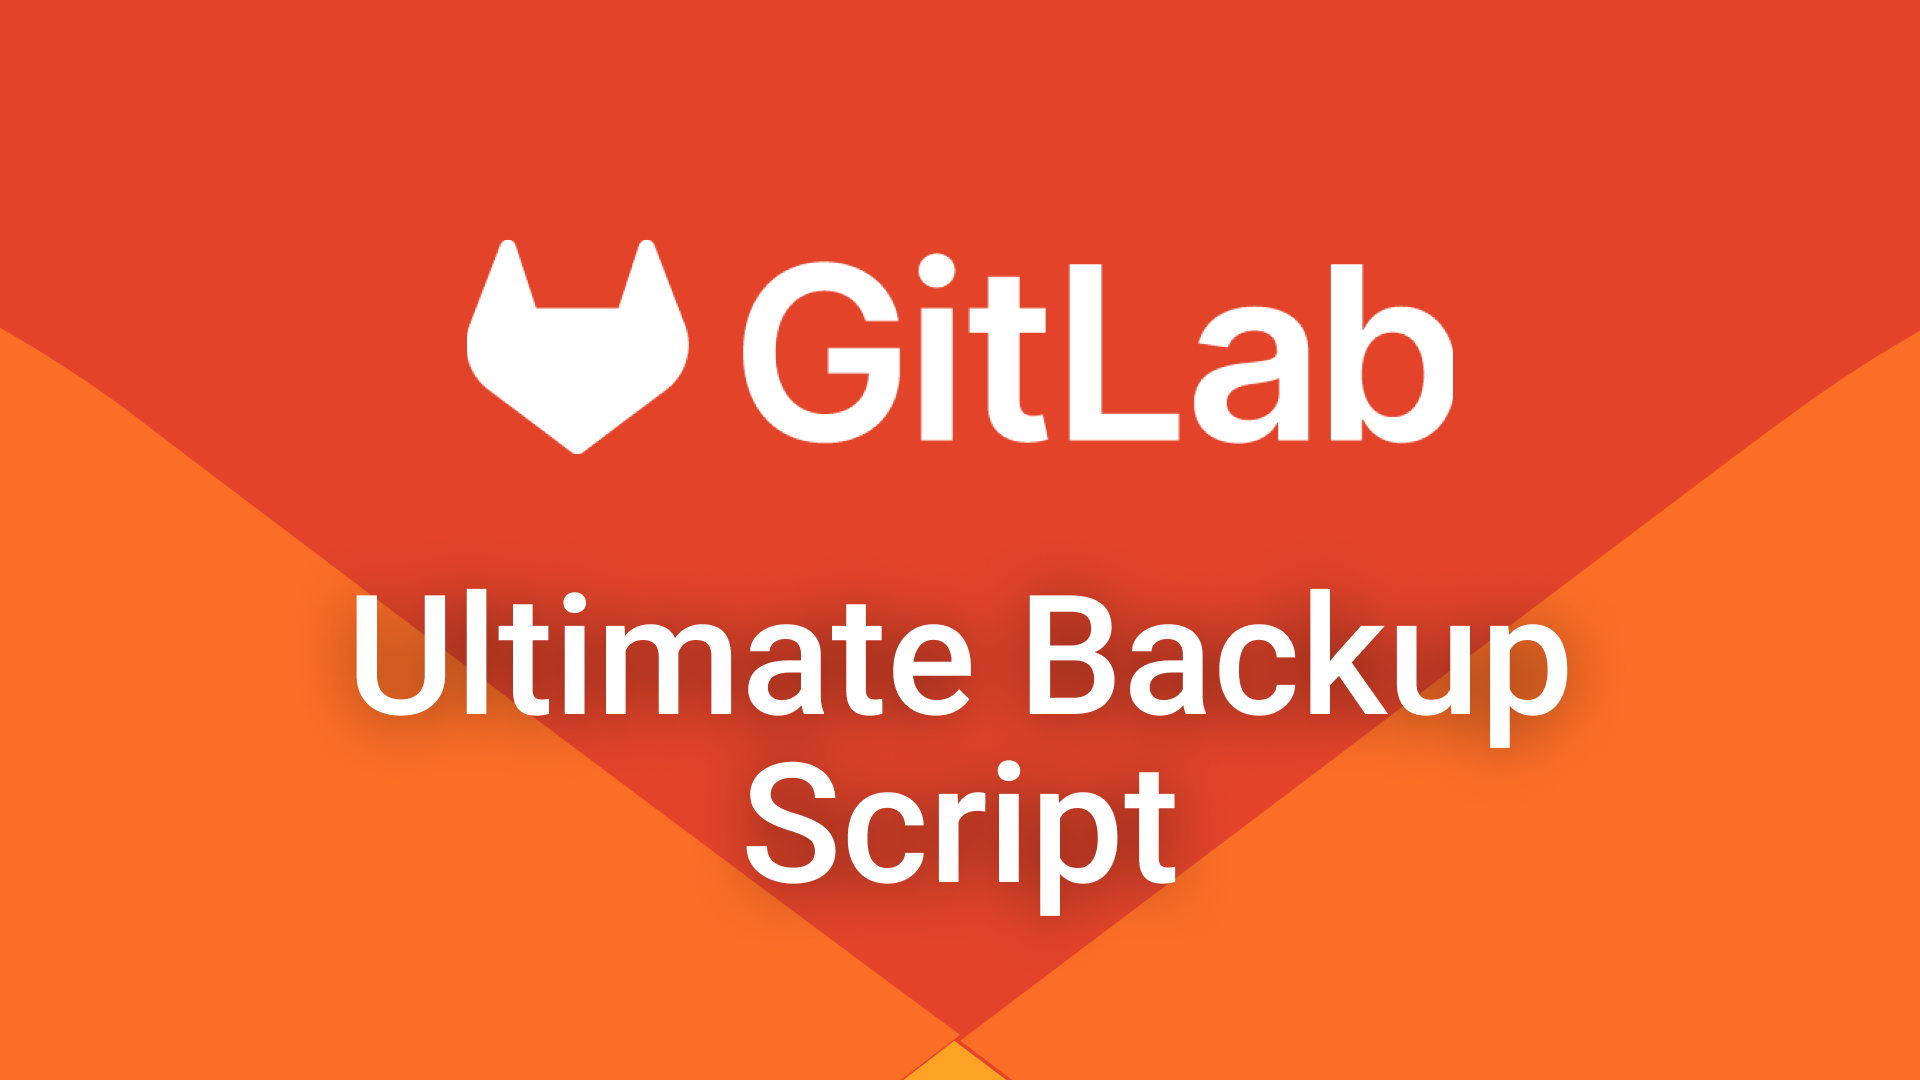 Automate GitLab Backups with Bash Scripts - Video Tutorial